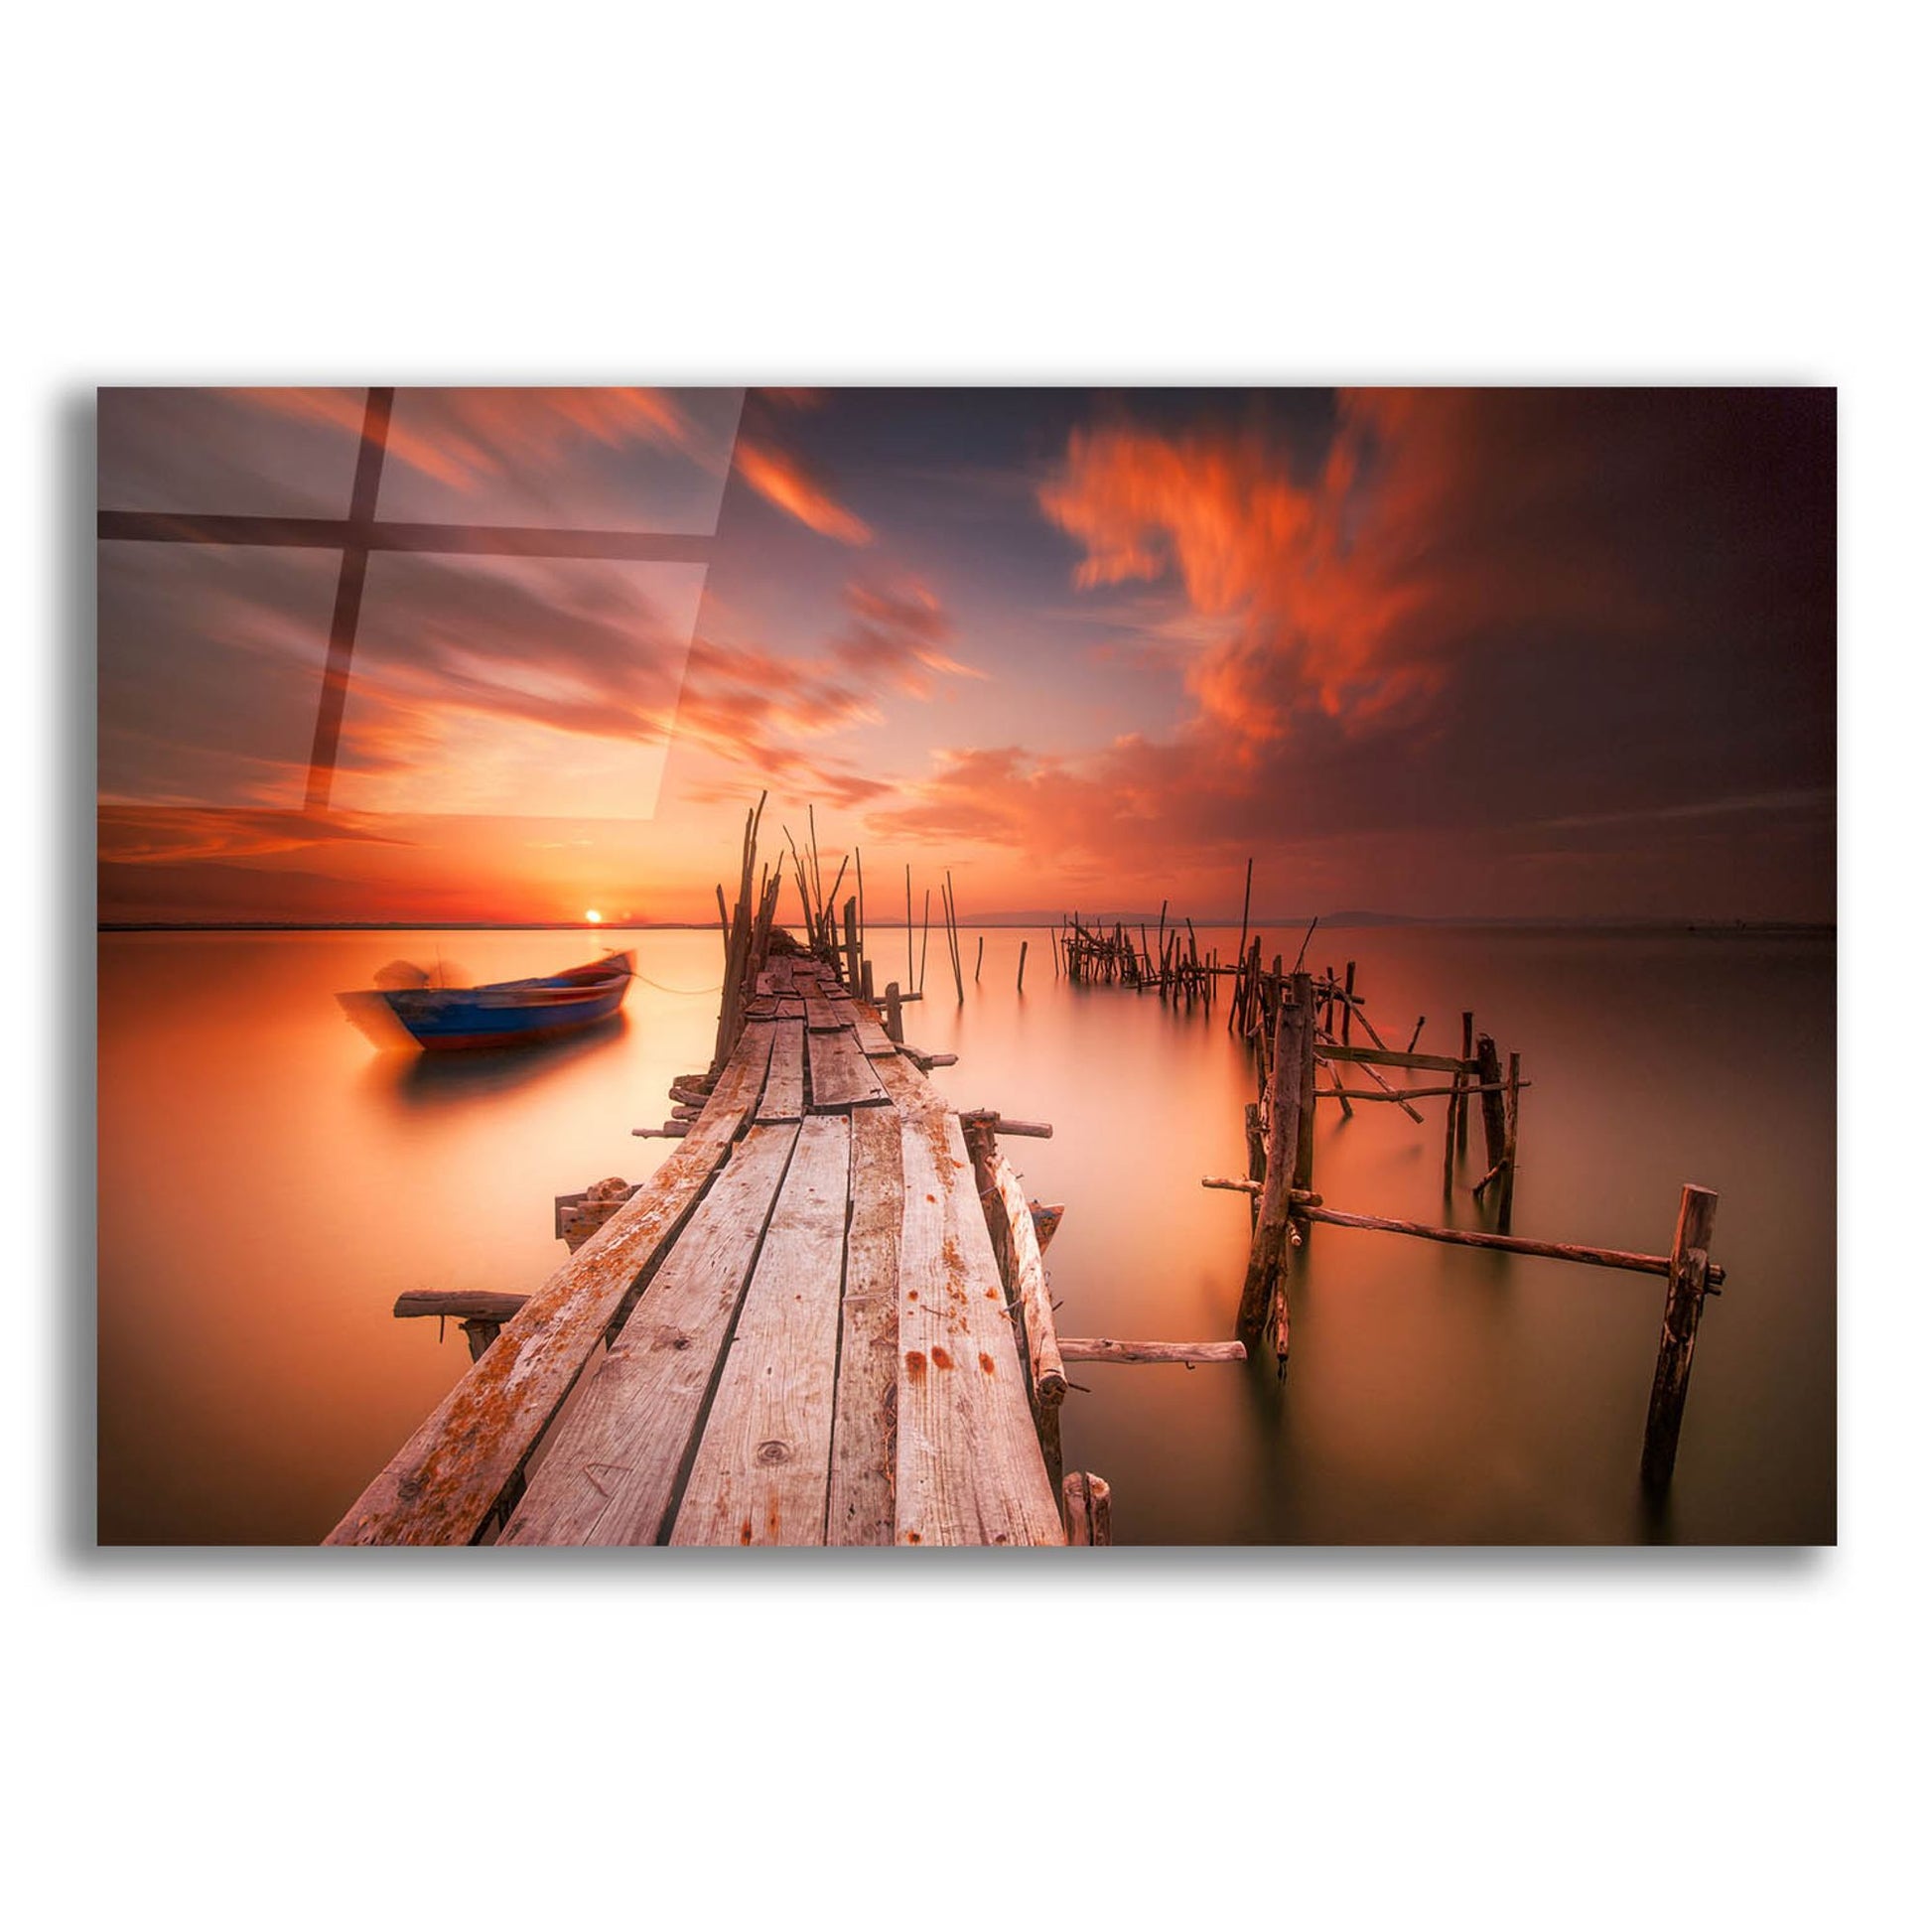 Epic Art 'Red Sunset at Carrasqueira Alentejo' by Andy Mumford, Acrylic Glass Wall Art,16x12